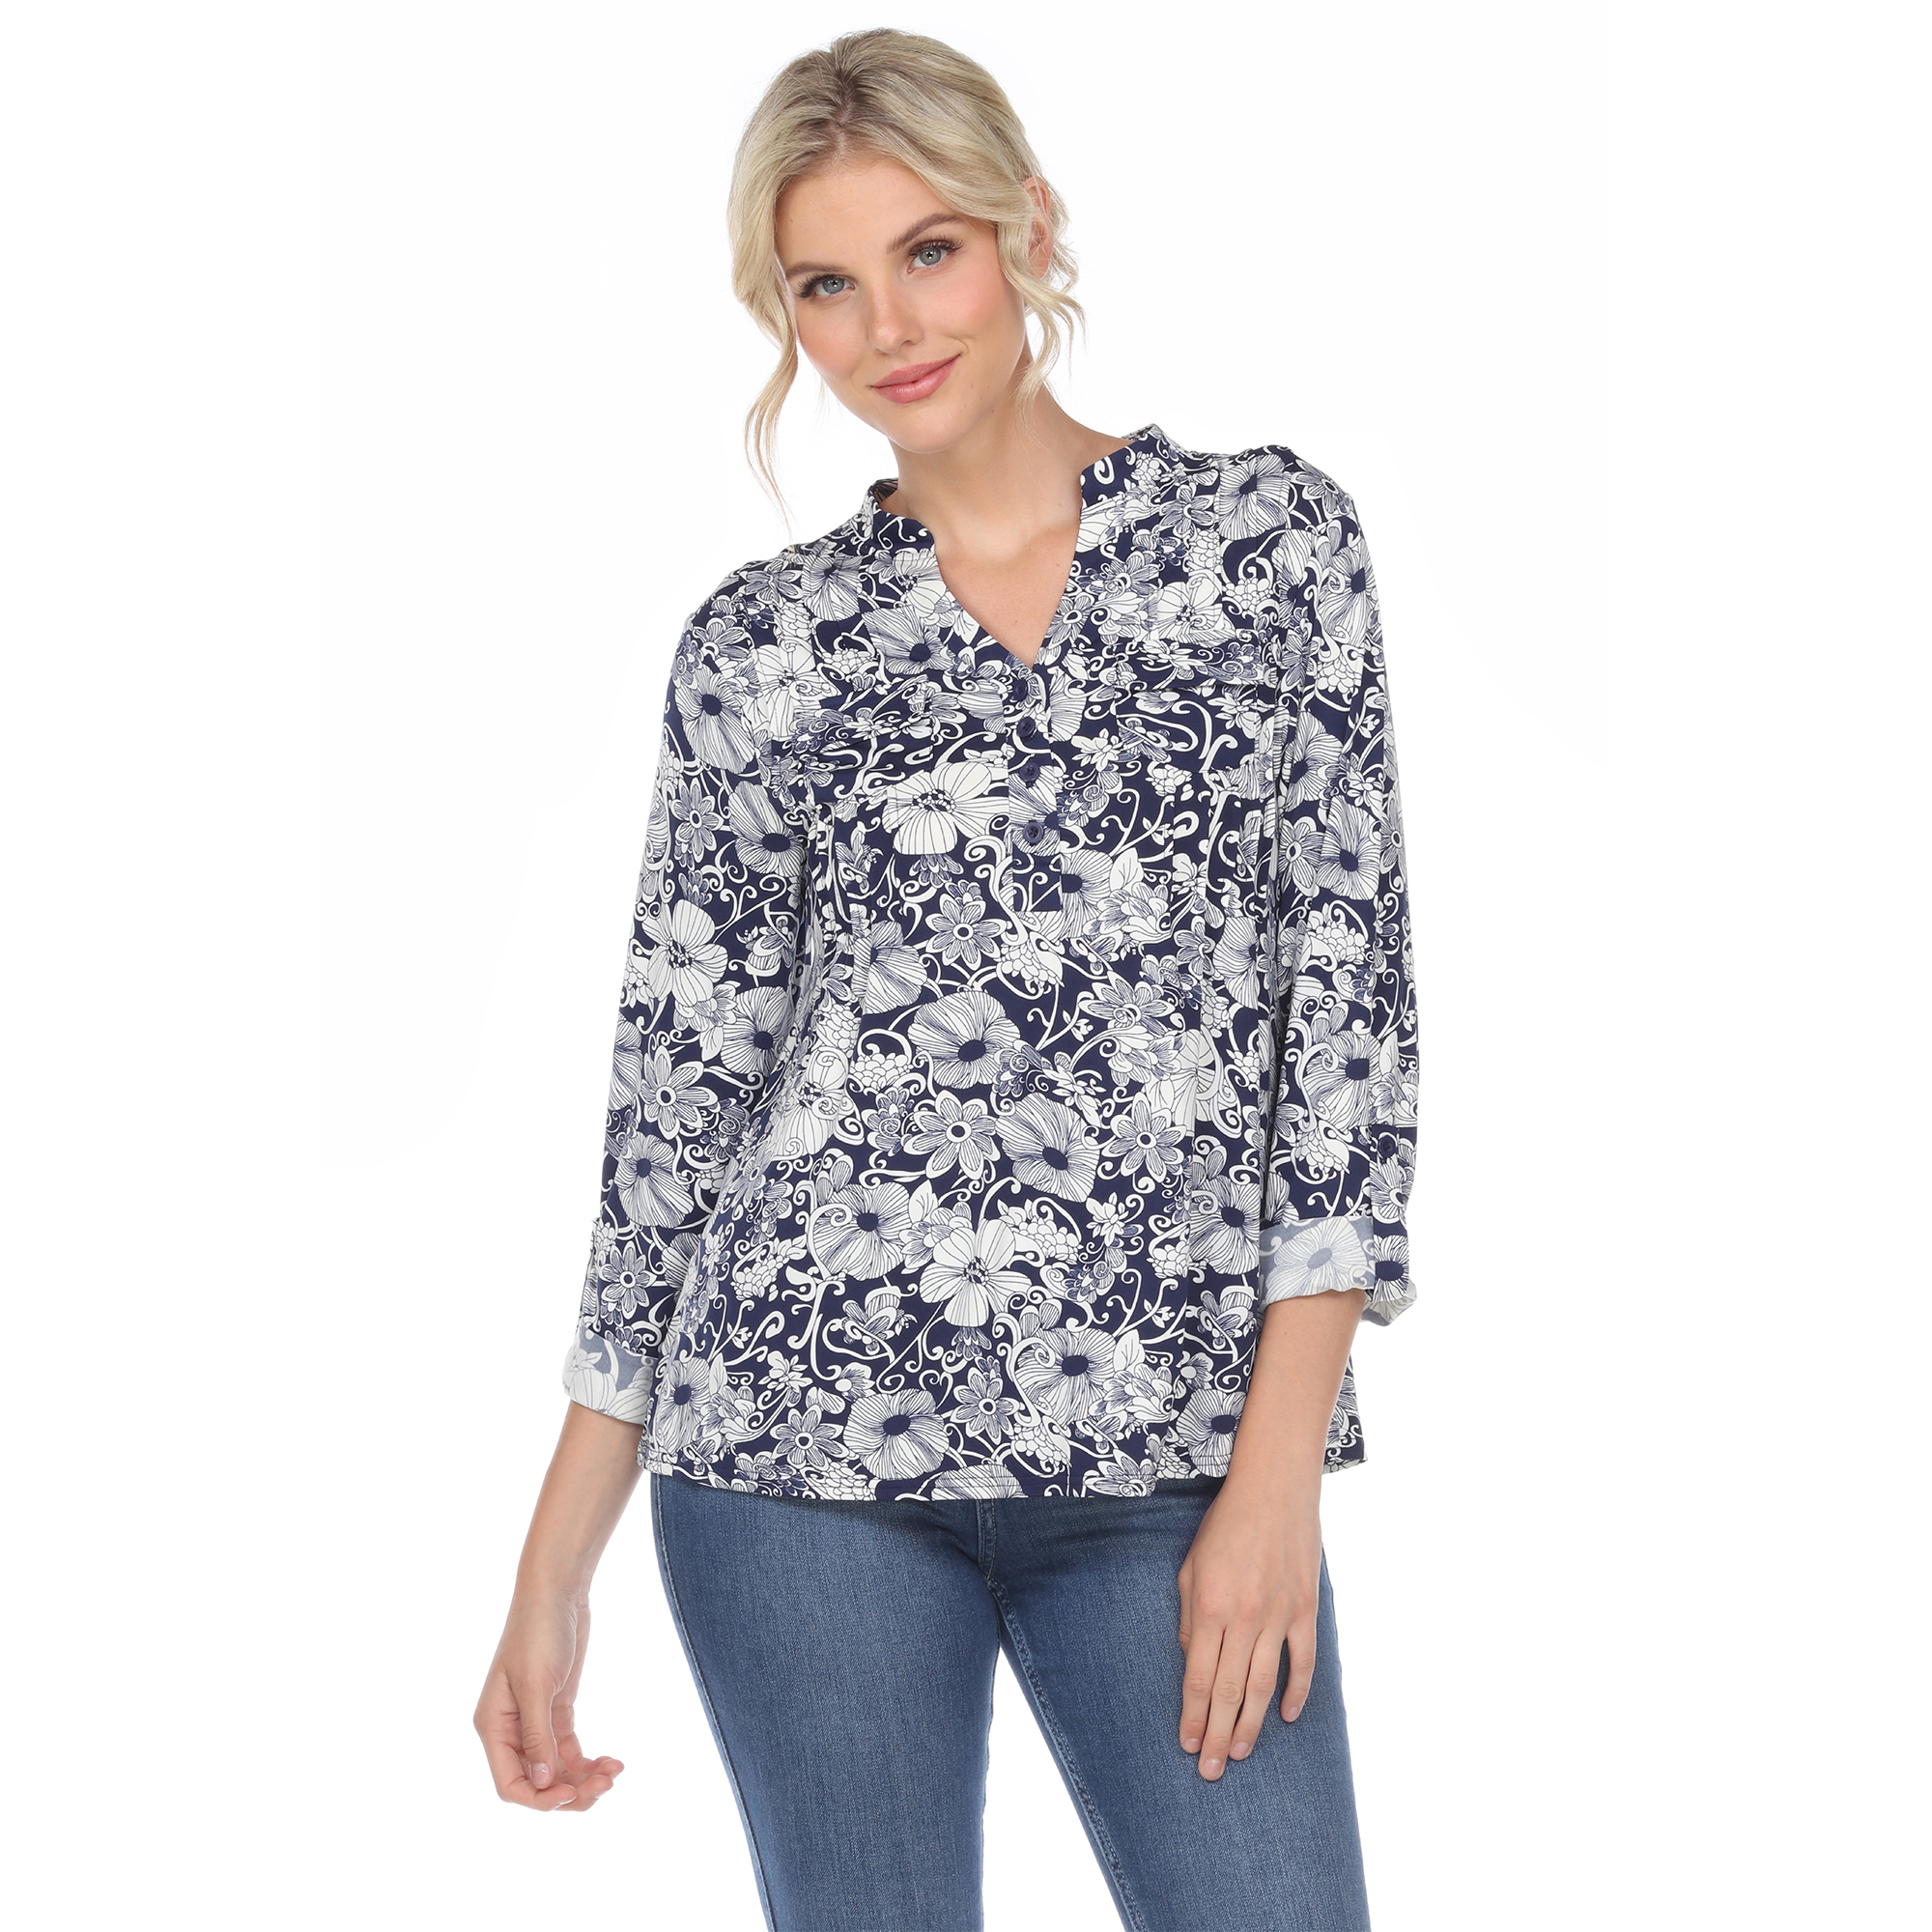 White Mark Women's Pleated Long Sleeve Floral Print Blouse - Navy, Small